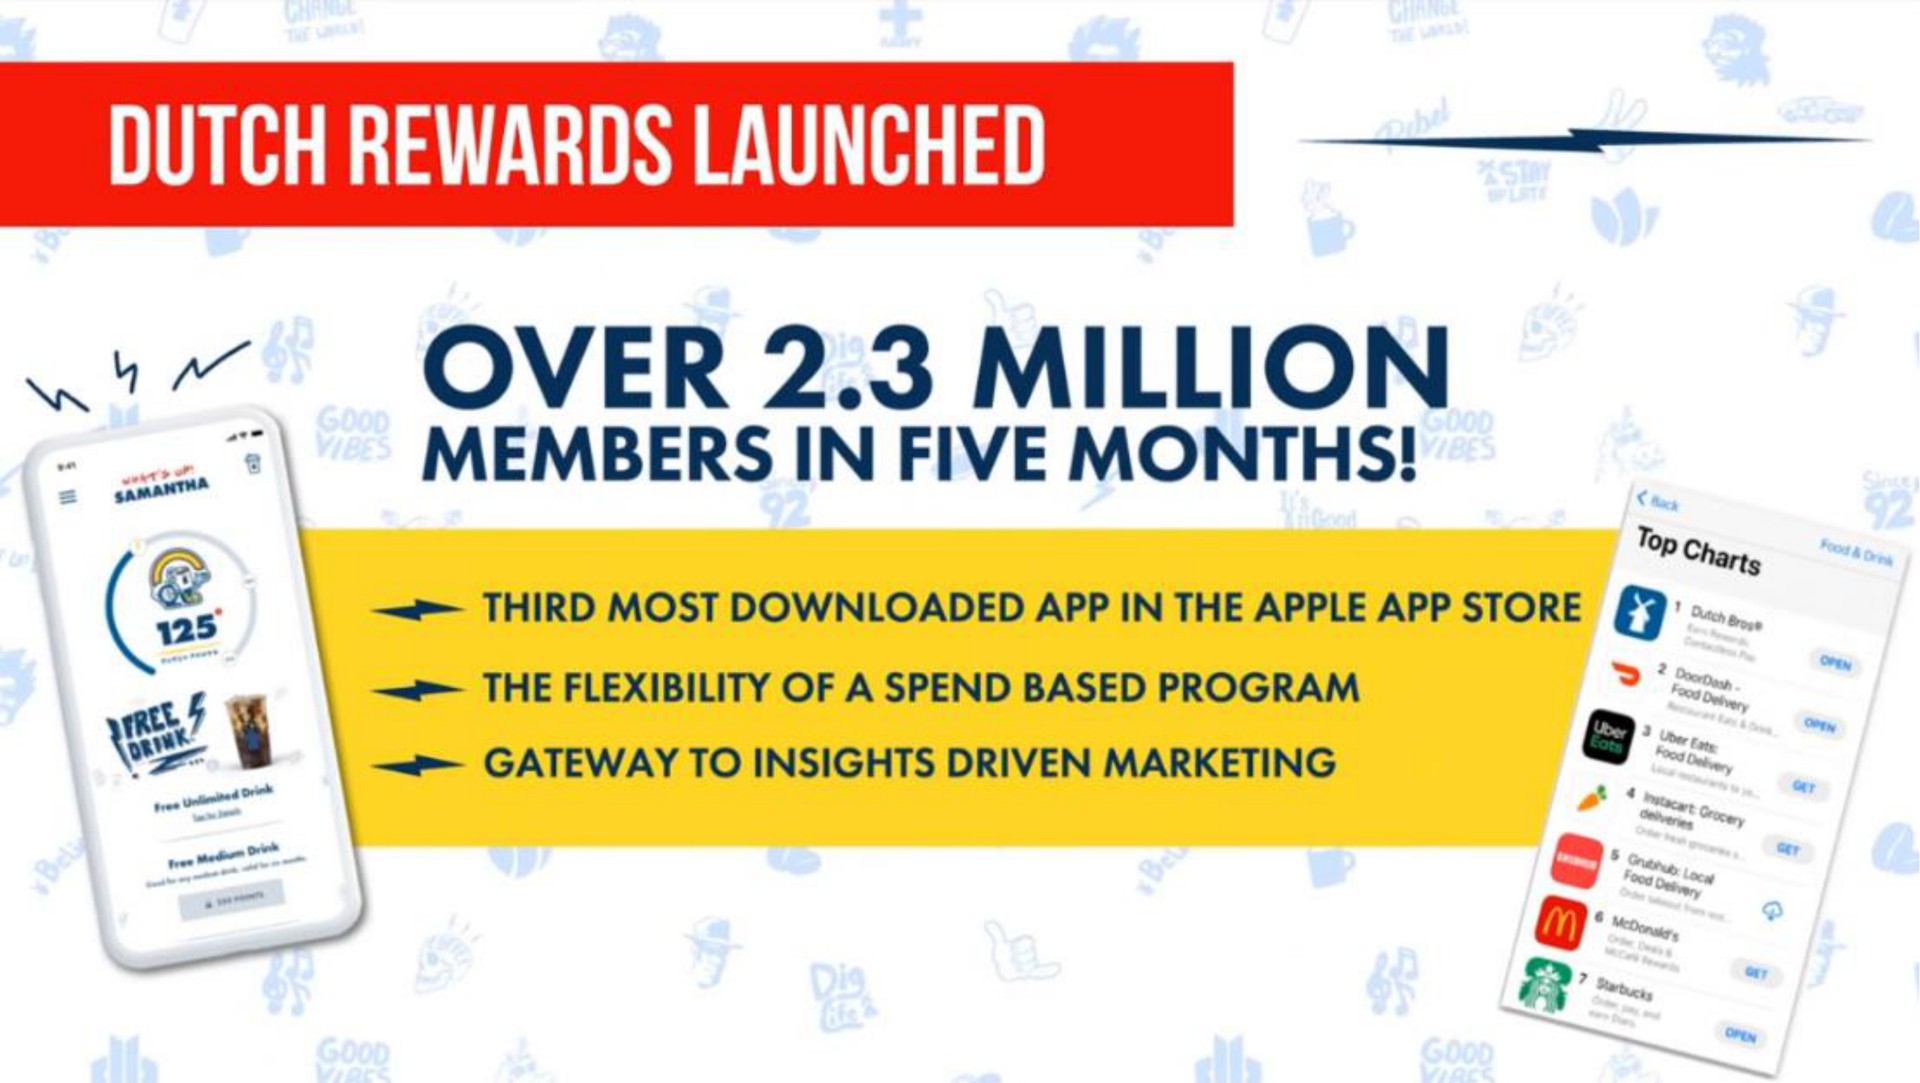 dutch rewards launched over million members in five months | Dutch Bros